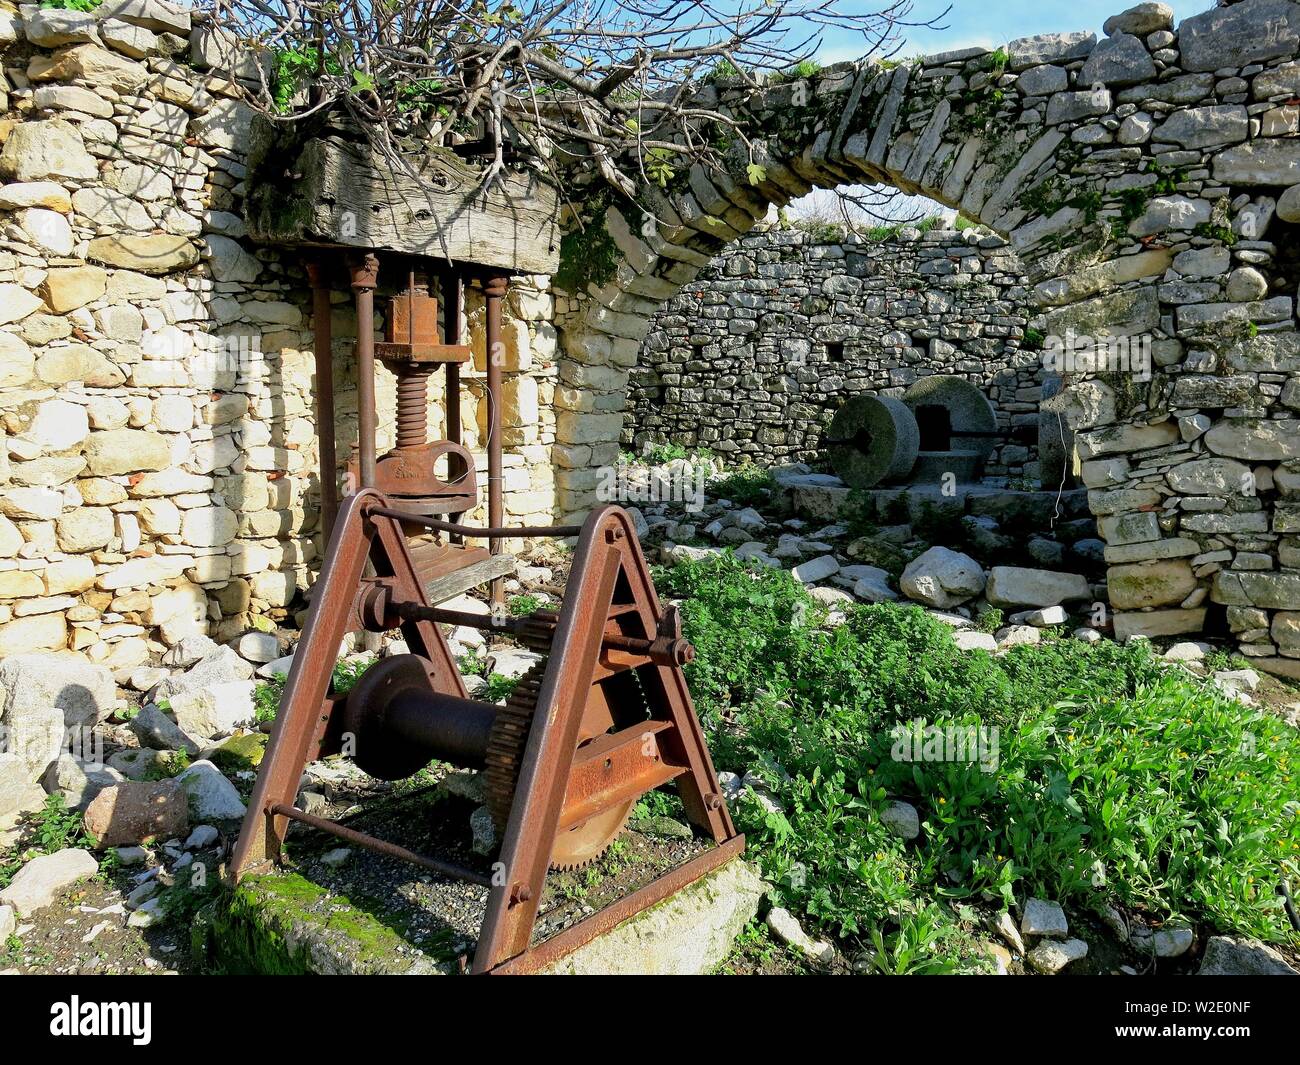 Ruins of an old oil press situated at Kato Moulia, Crete, Greece. Stock Photo